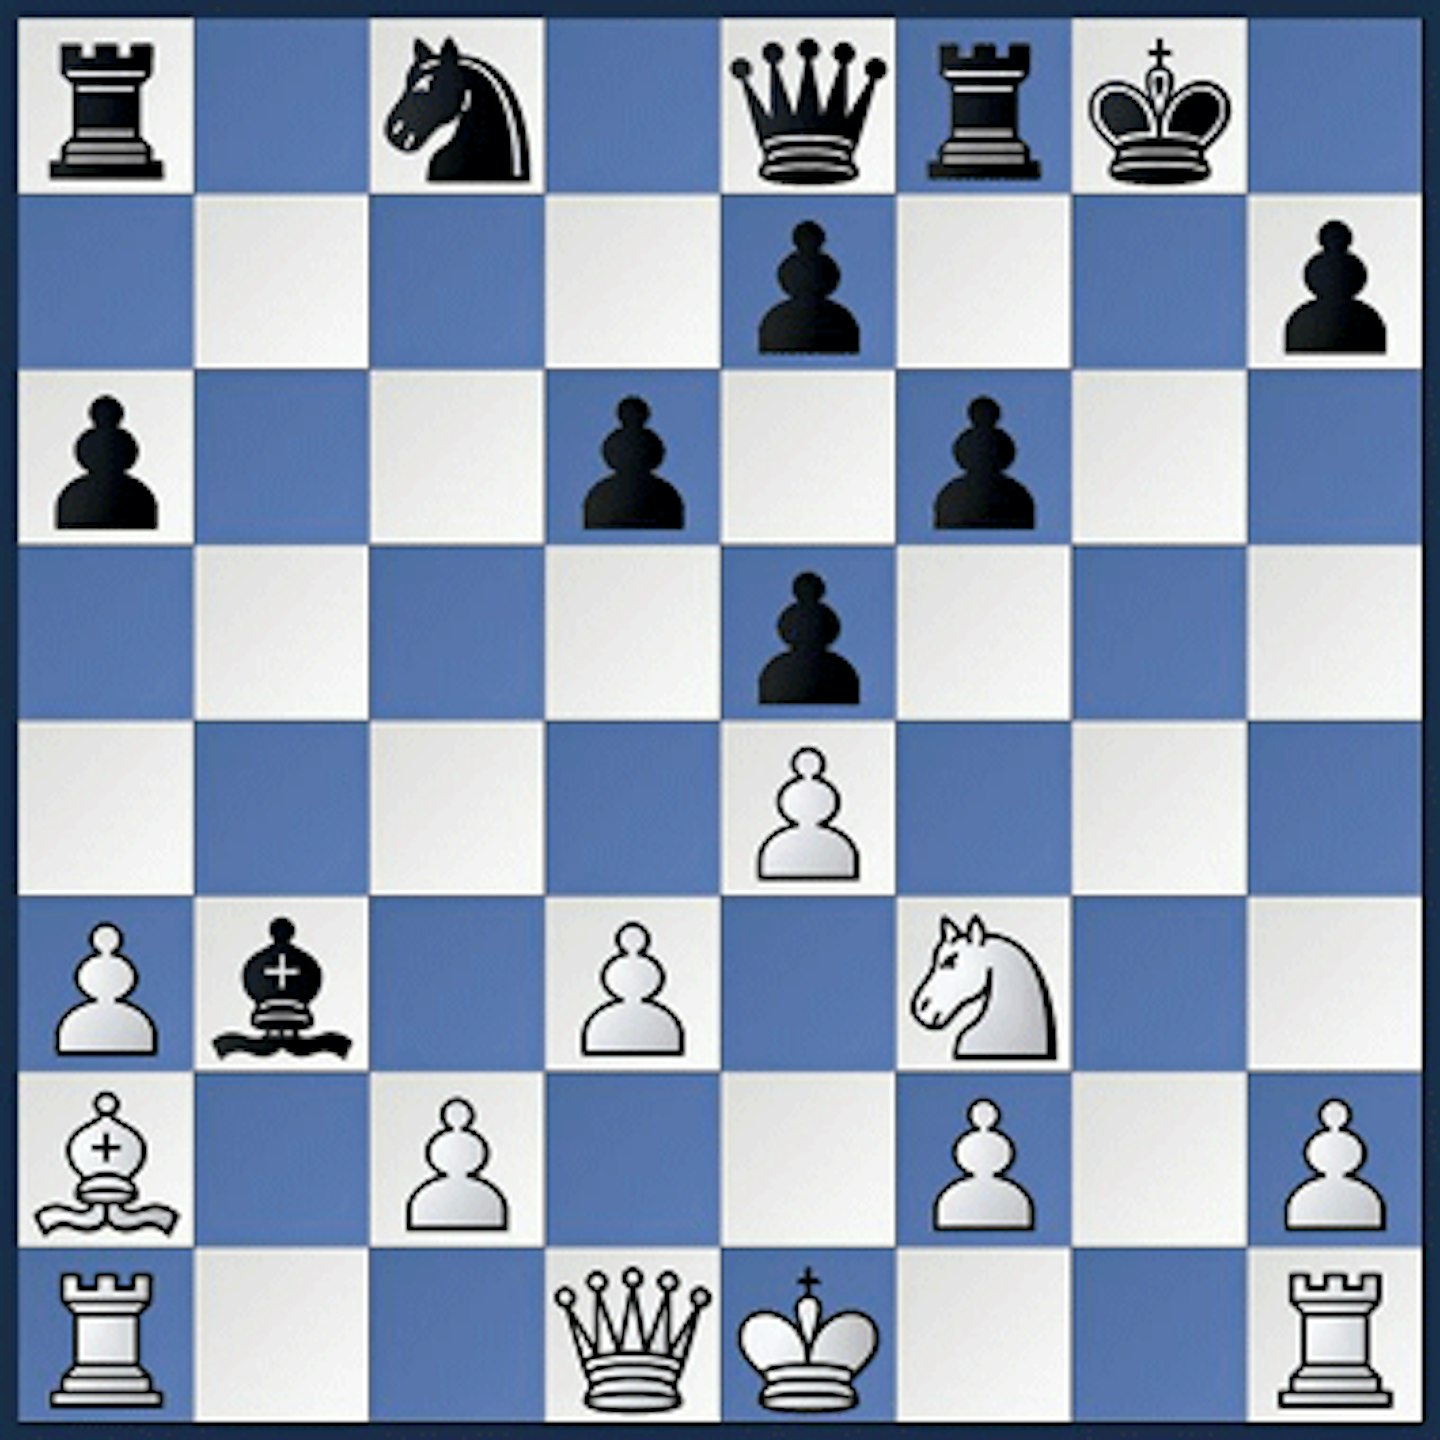 Top-45 Chess Films. IMDB rating. The Queen's Gambit, Endgame, The  Seventh Seal 